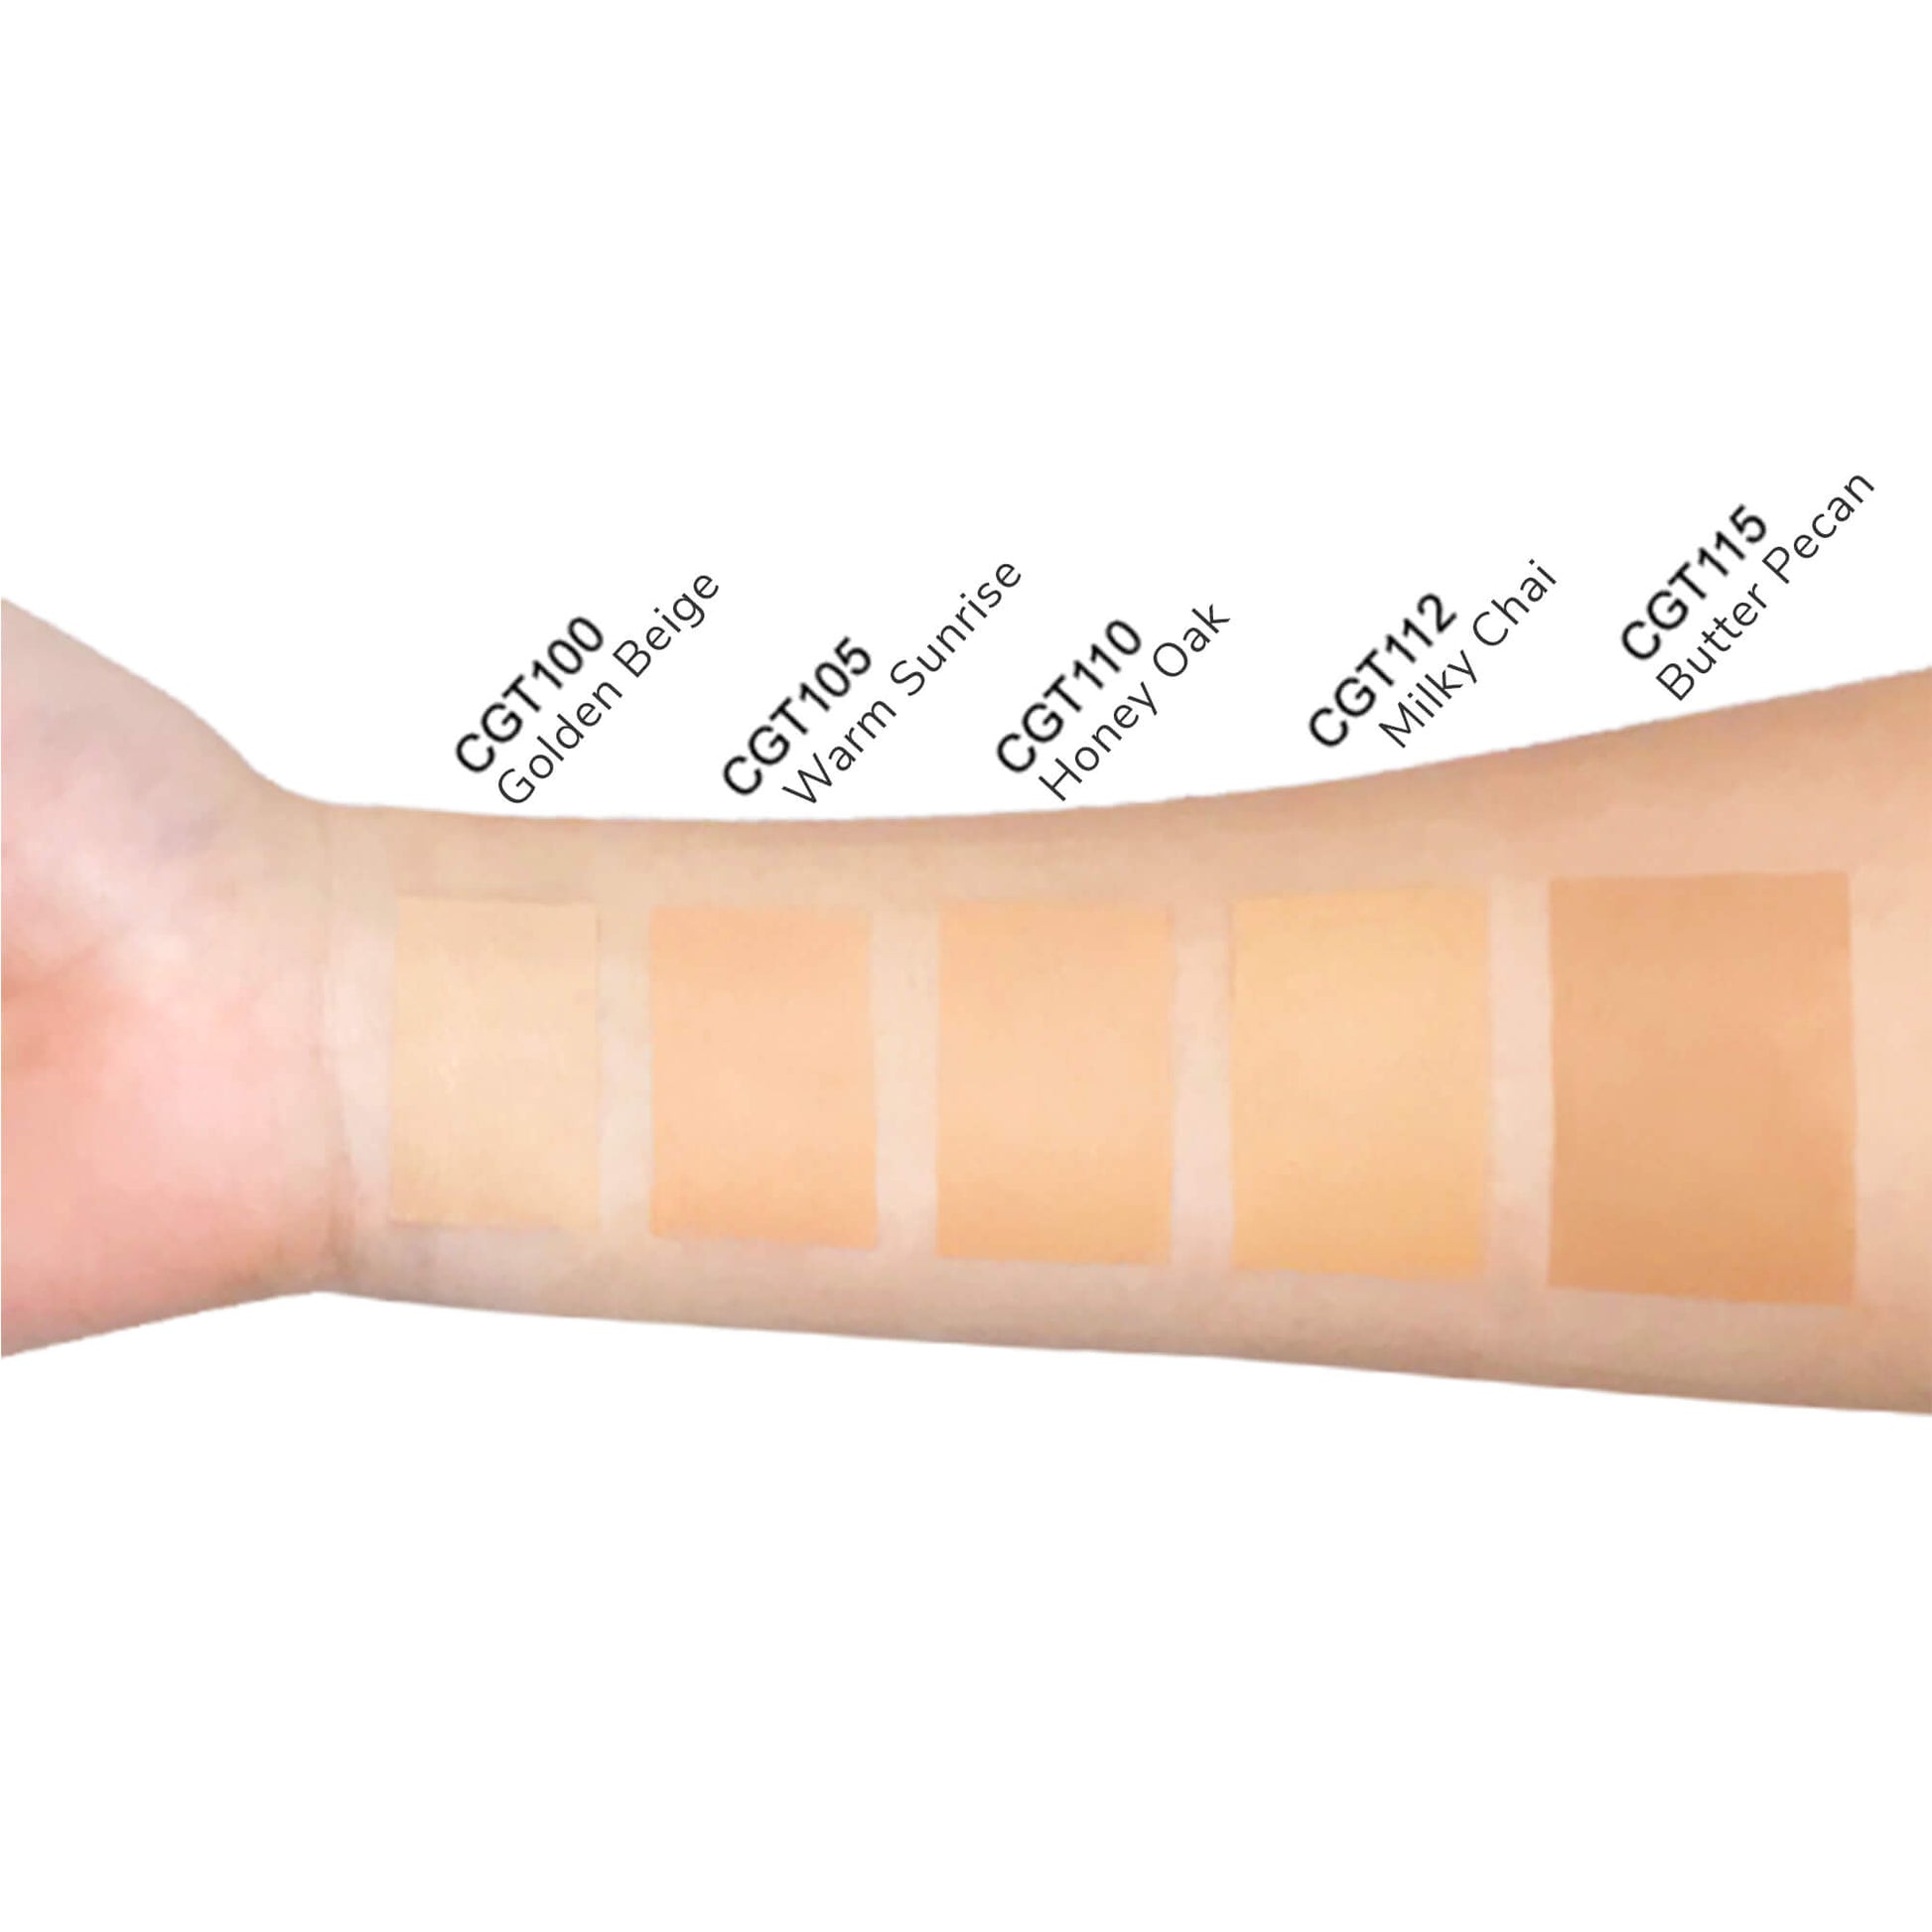 Achieve a flawless complexion with Cruisin Organics' Golden Beige Concealer Stick. This convenient stick offers versatile coverage and a matte finish for all your imperfections. Use darker shades for contouring and lighter shades for highlighting, giving you a flawless and defined look.